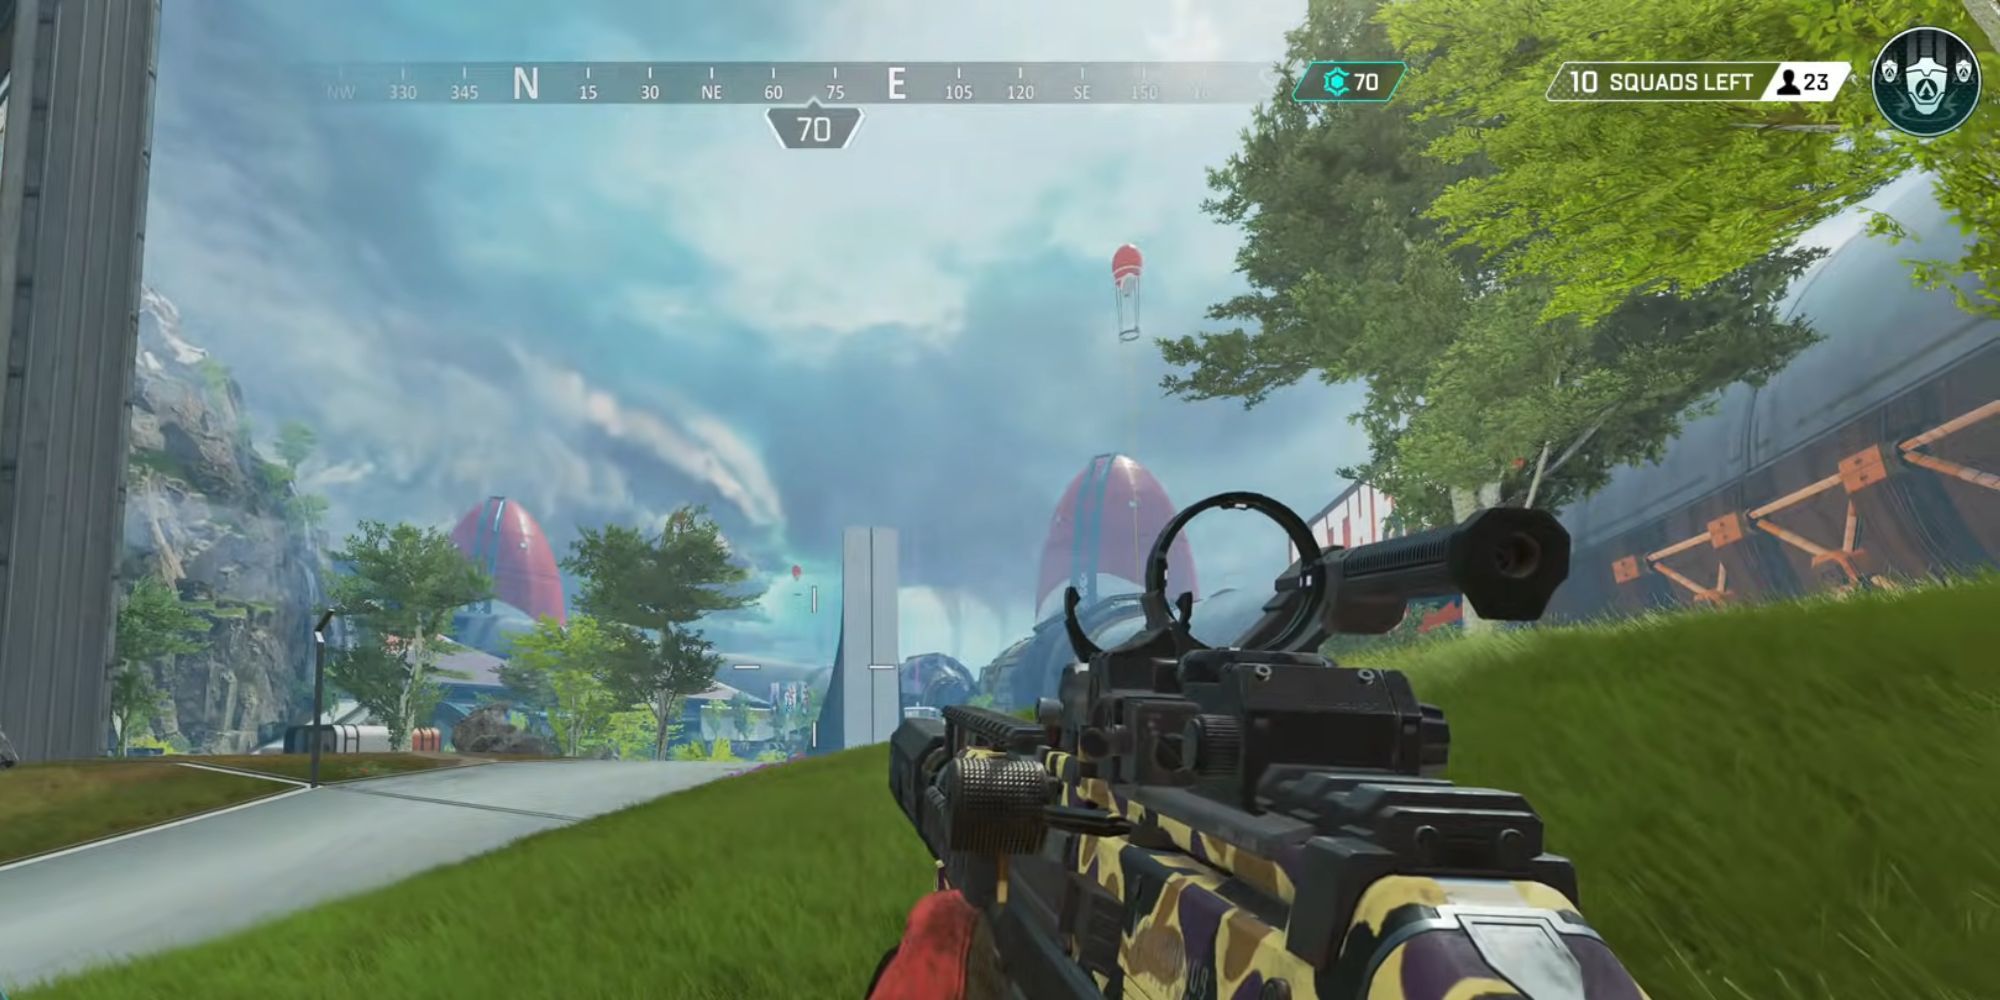 Player Bloodhound aims at 70 Northeast as only ten squads remain in Apex Legends